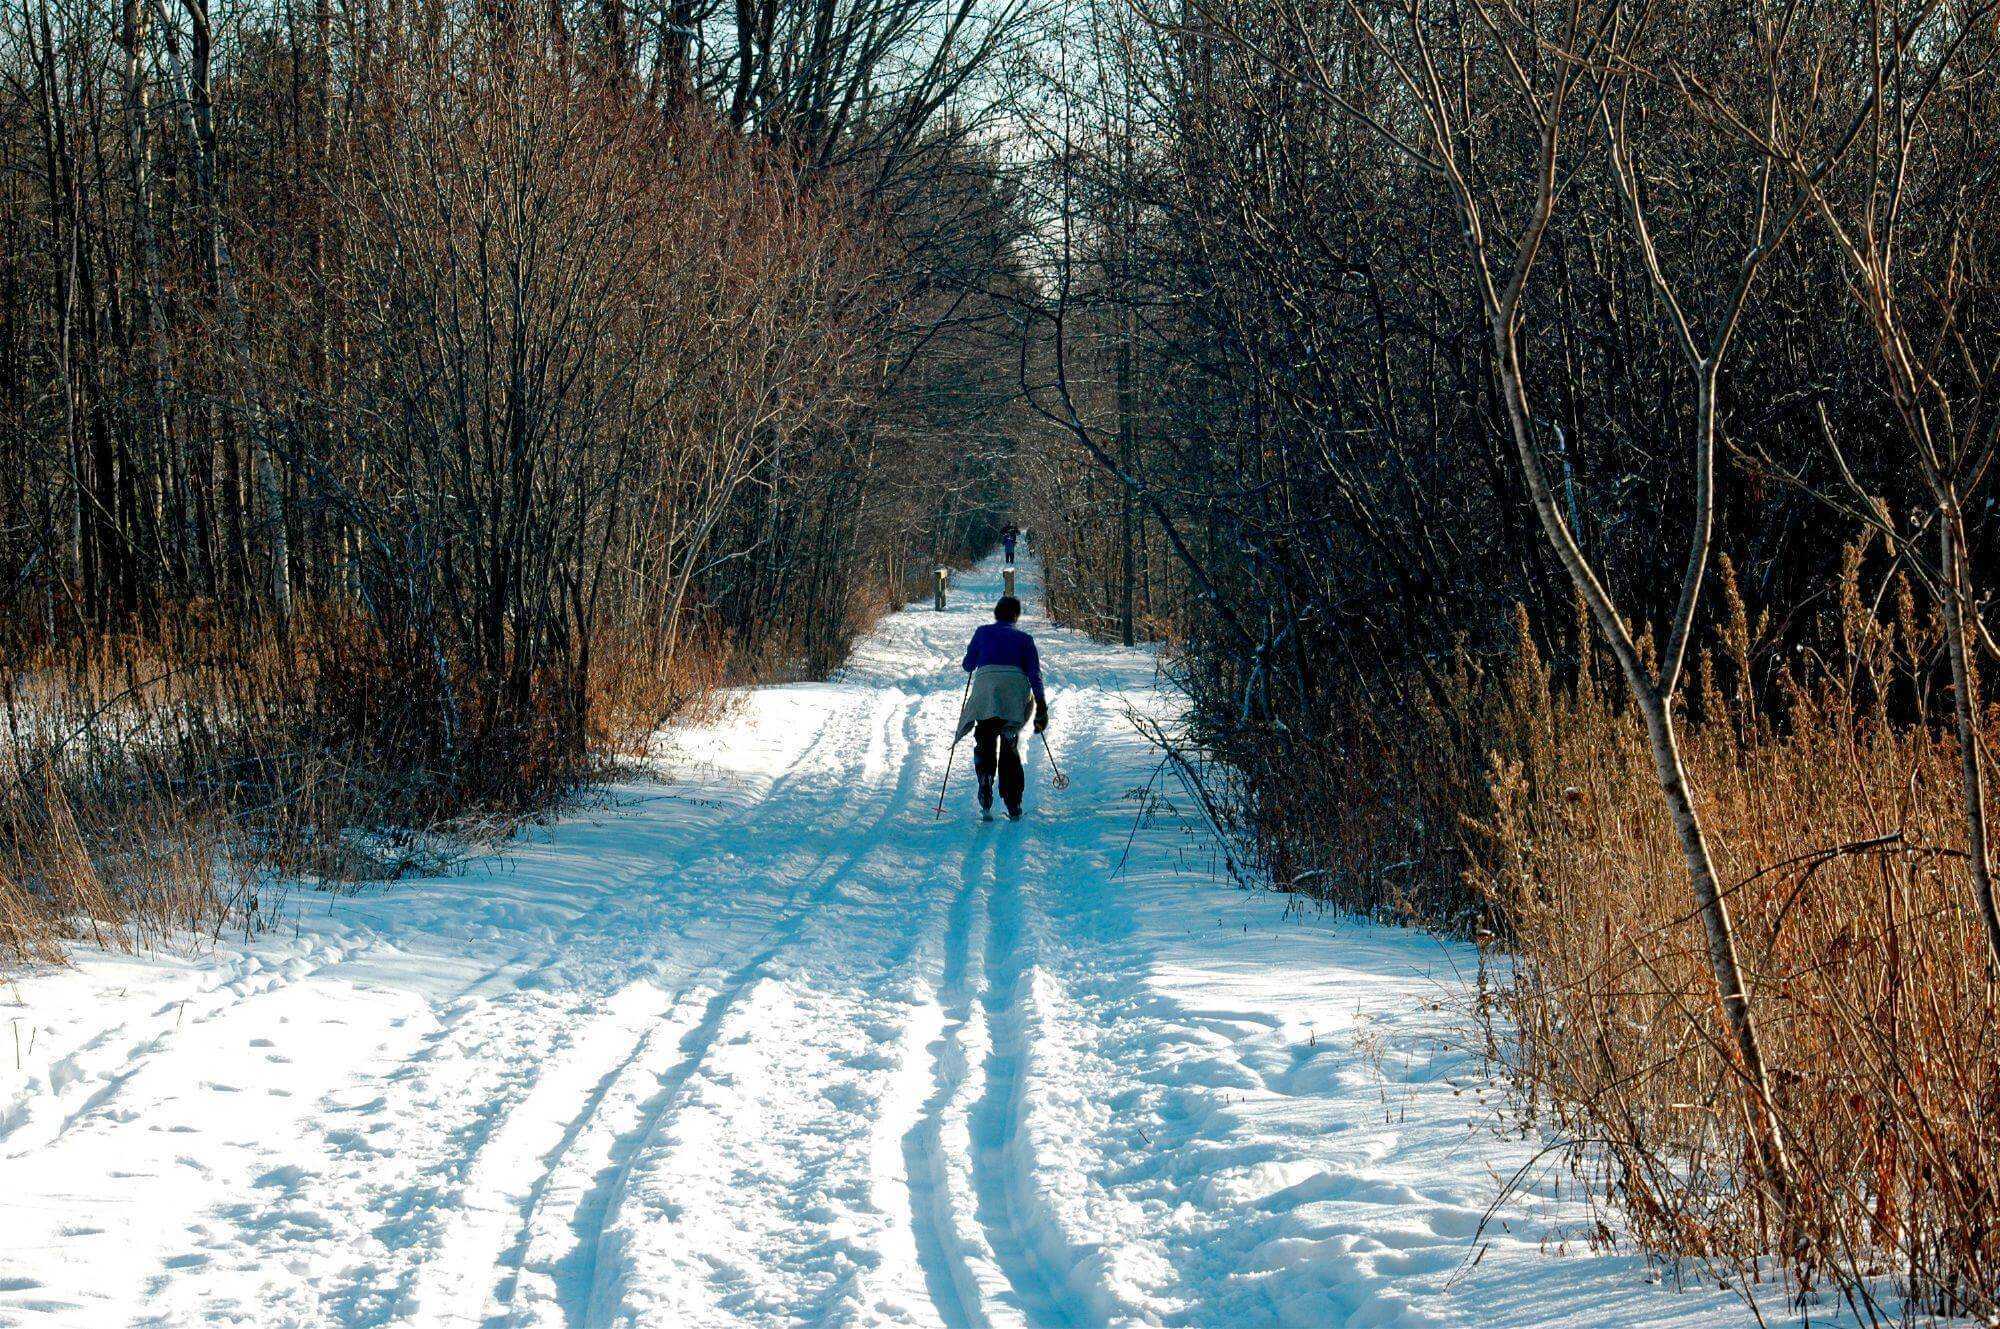 ski tracks on a greenbelt trail and a skier in the background